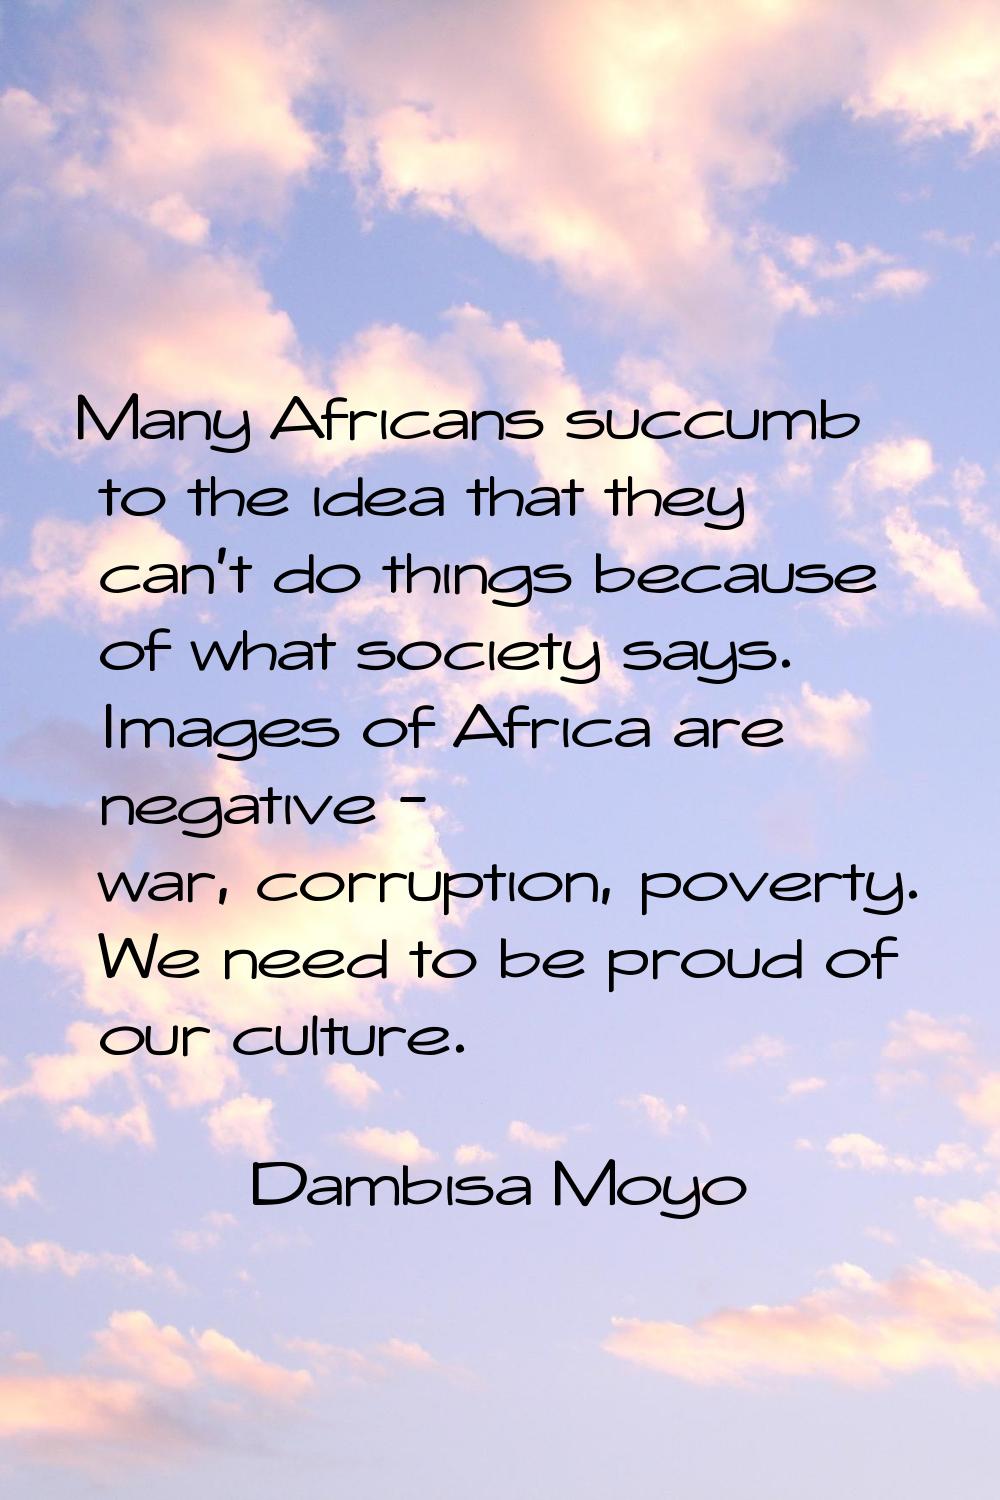 Many Africans succumb to the idea that they can't do things because of what society says. Images of